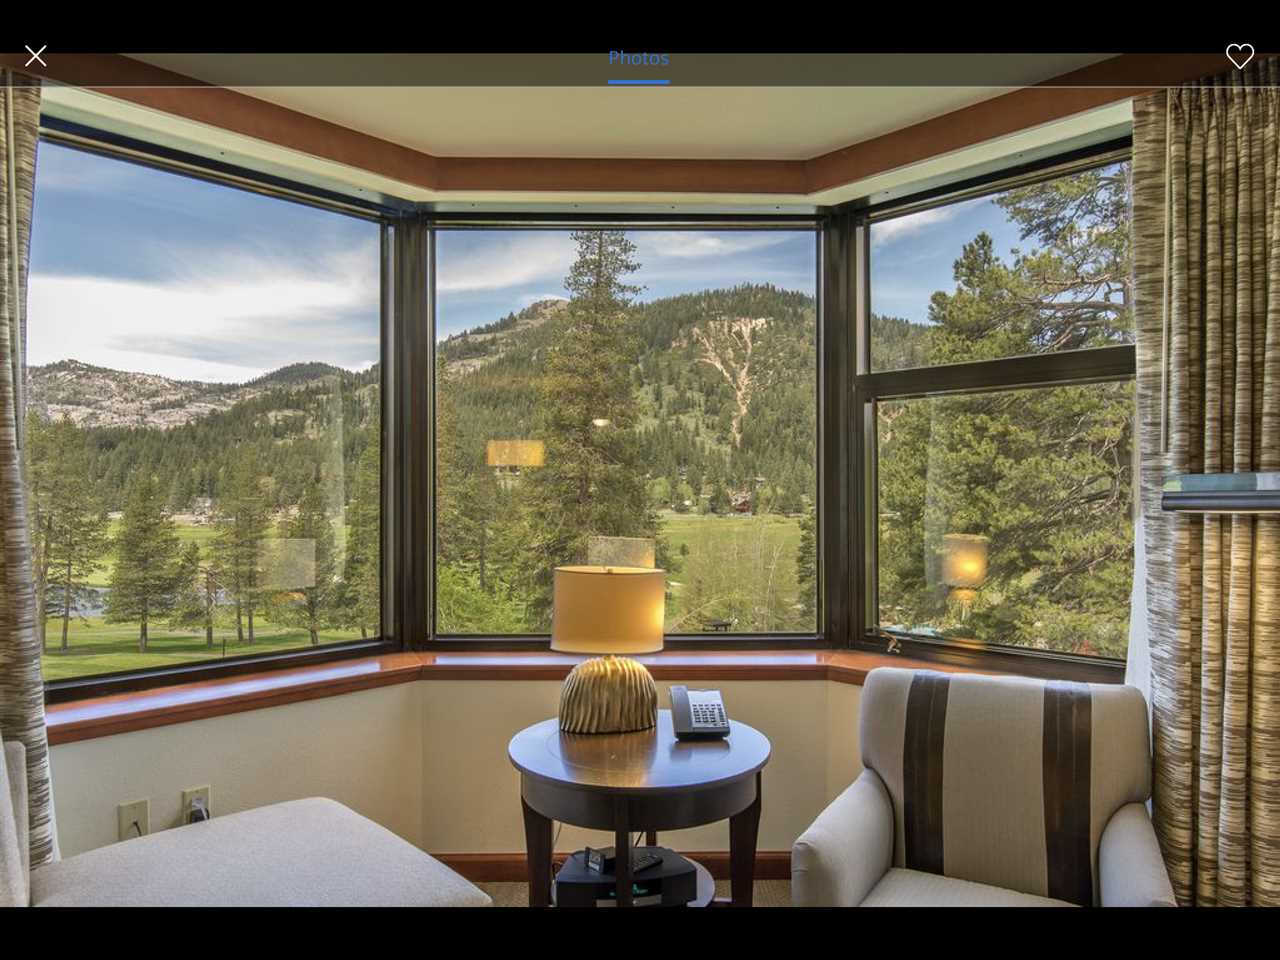 Image for 400 Squaw Creek Road, Olympic Valley, CA 96146